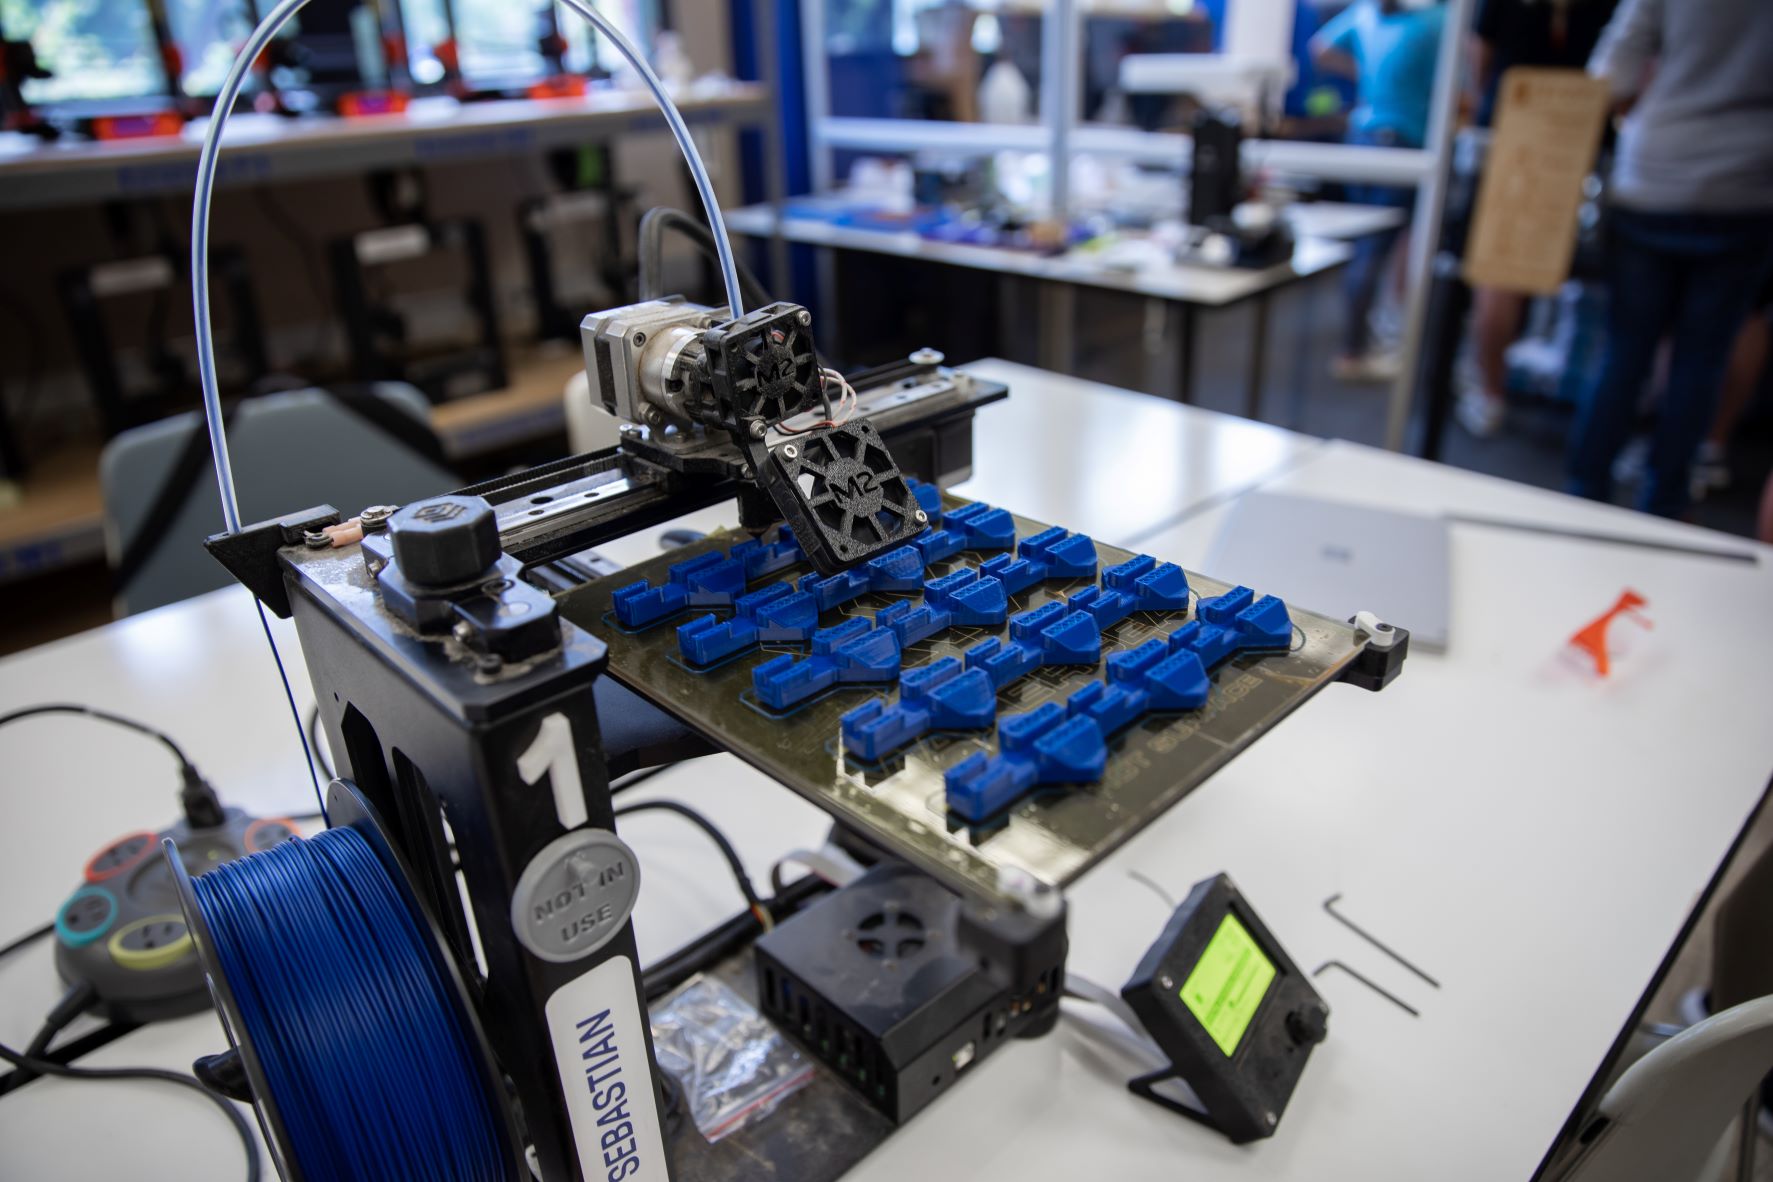 3D printing in the Innovation Center